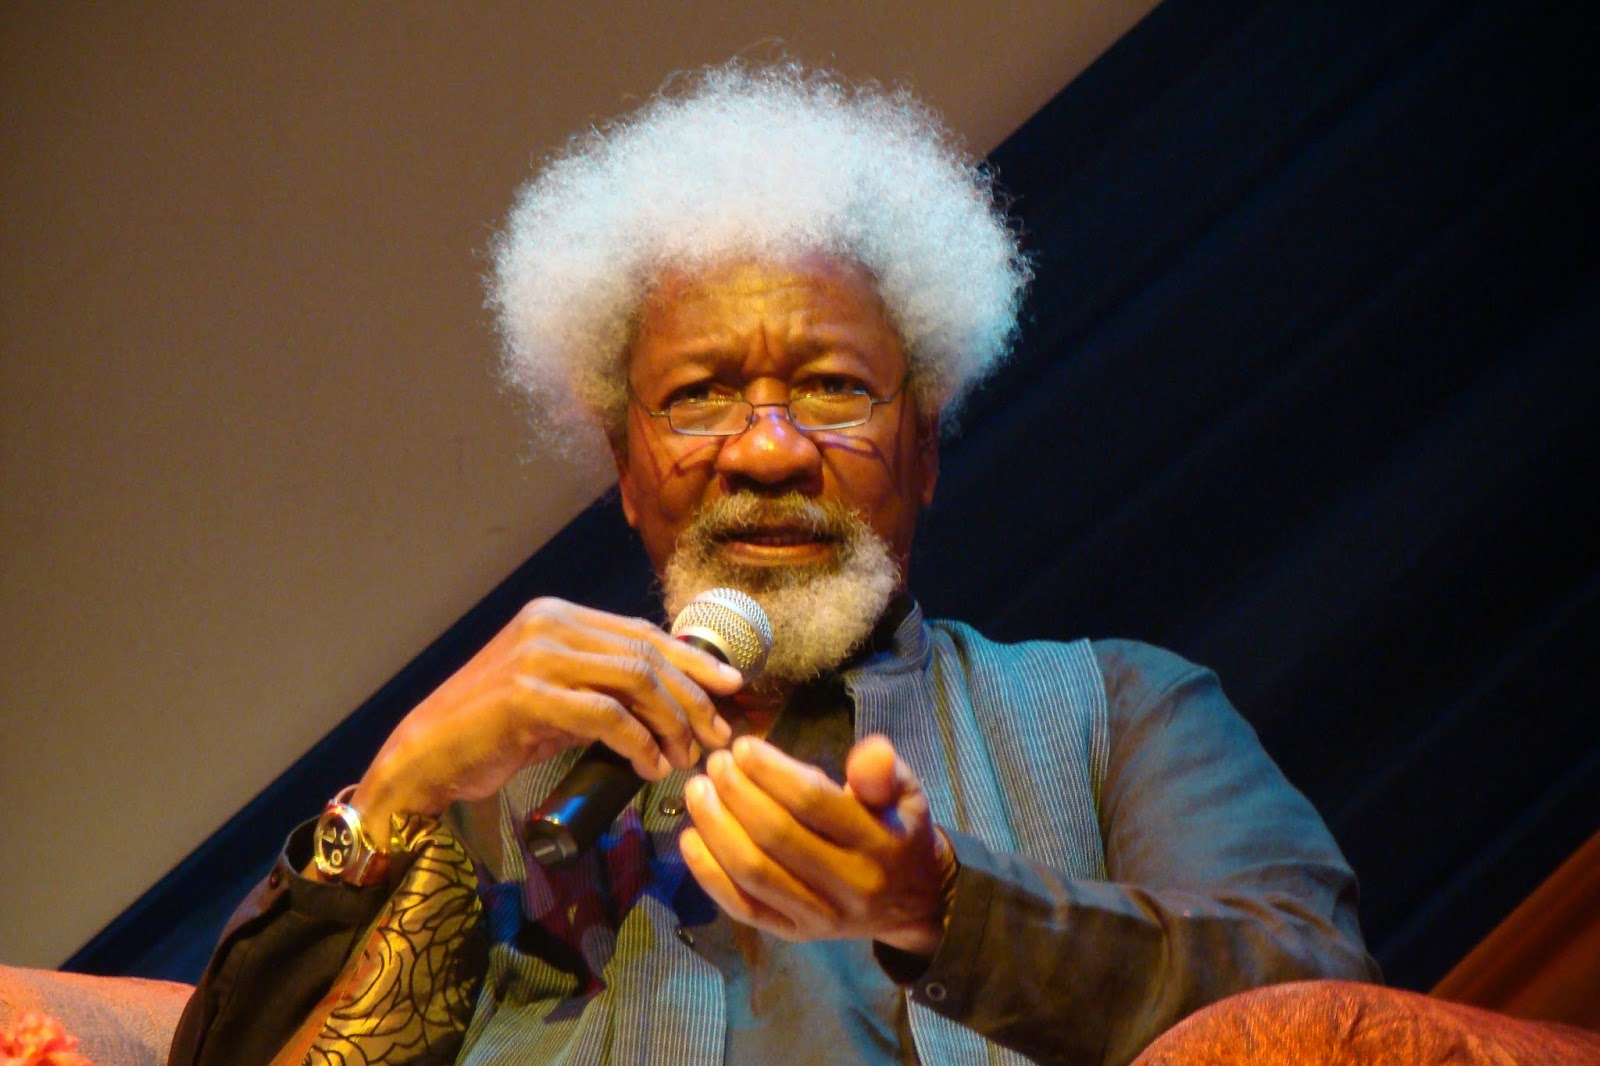 CITA also asked Professor Wole Soyinka (pictured), Pastor Tunde Bakare, Hon. Patrick Obahiagbon, the leadership and members of the Save Nigeria Group to join in issuing the apology.